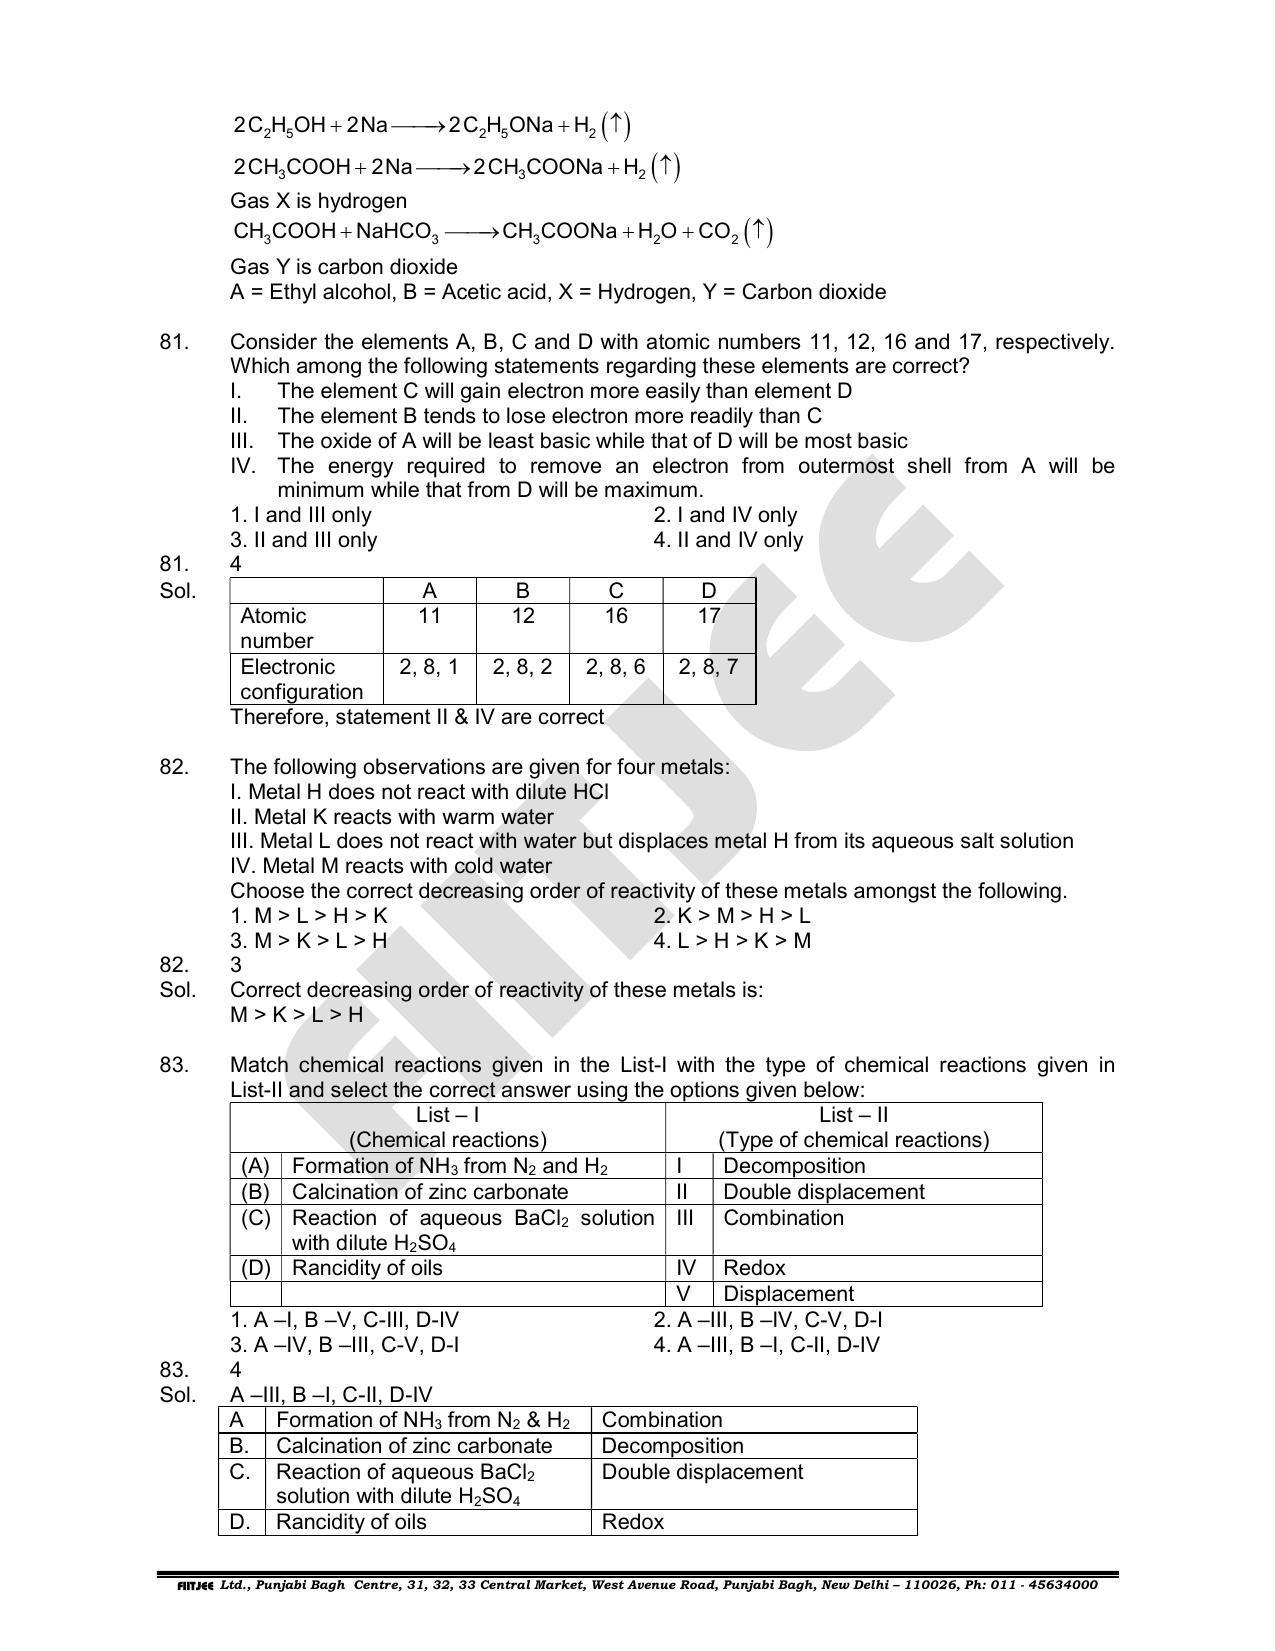 NTSE 2019 (Stage II) SAT Paper with Solution (June 16, 2019) - Page 26